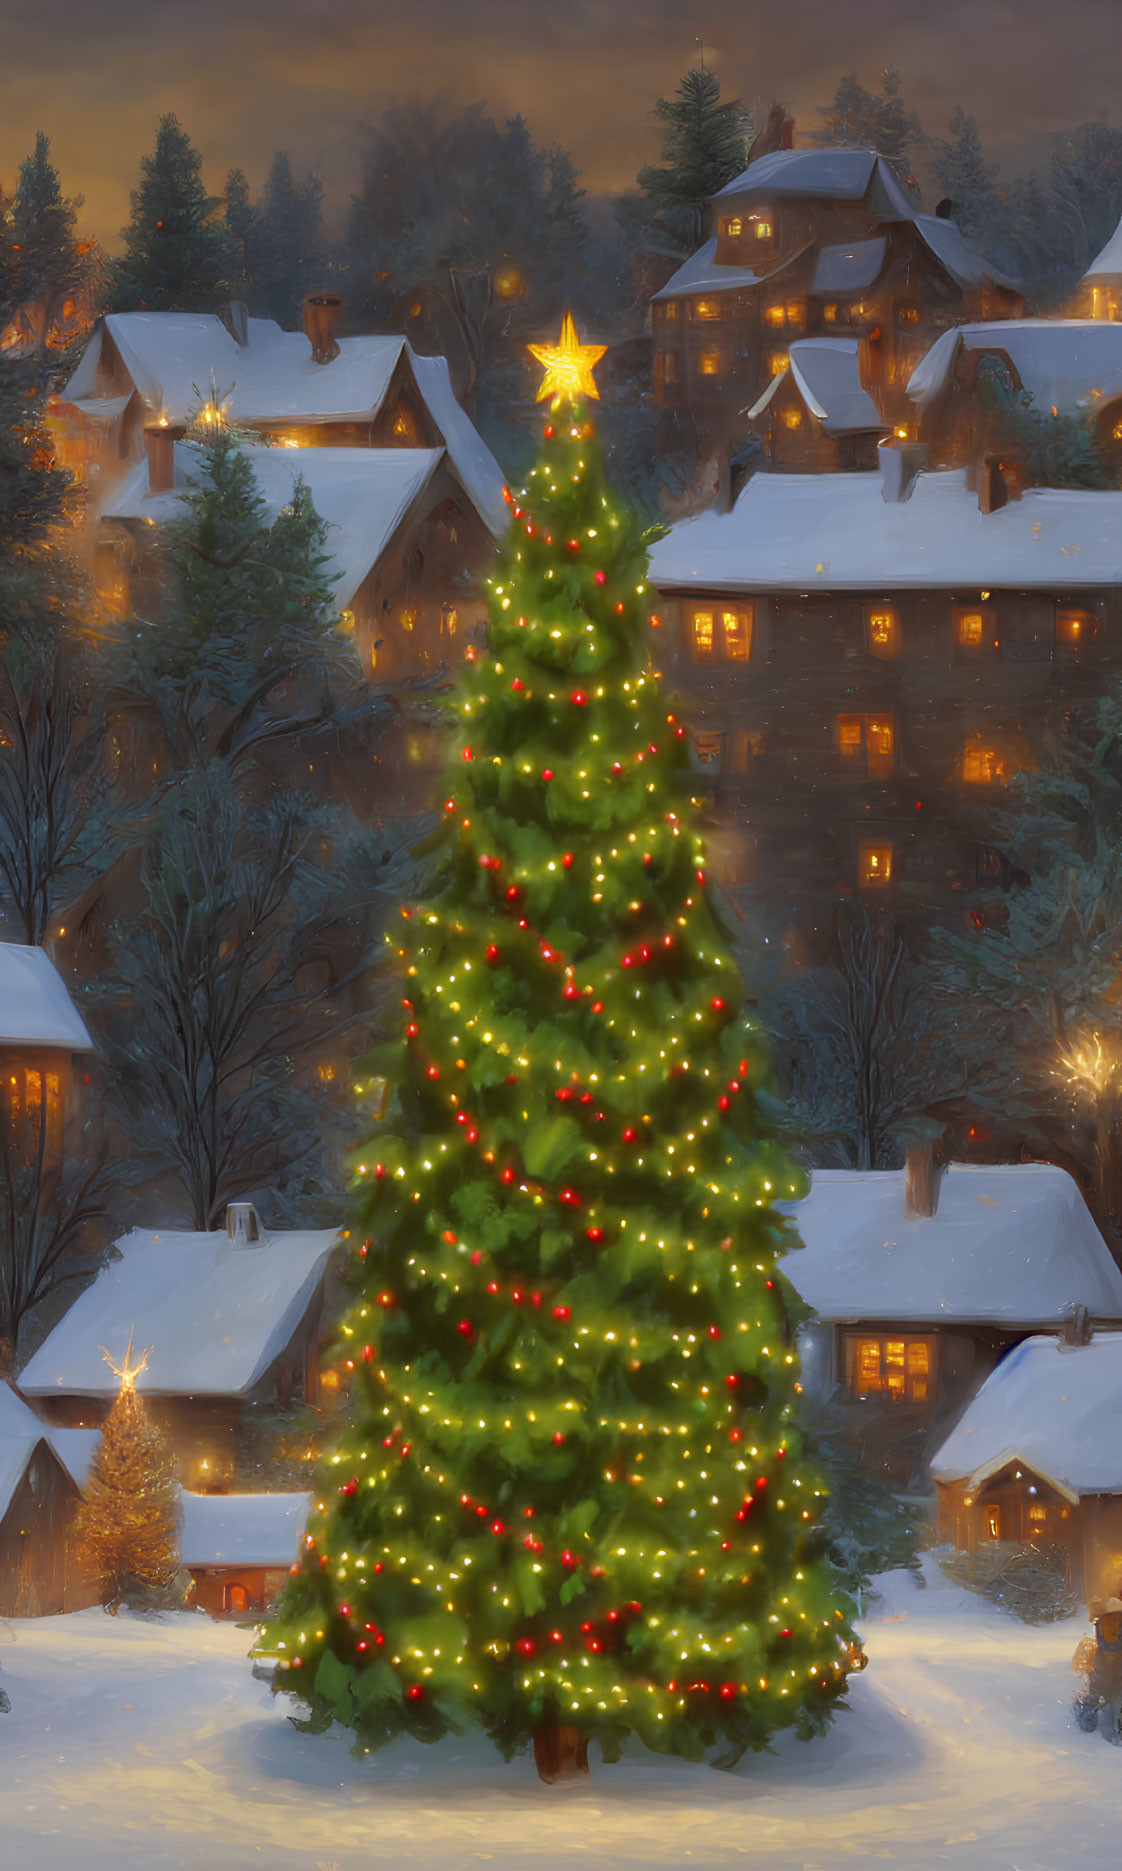 Glowing Christmas tree in snowy village at twilight